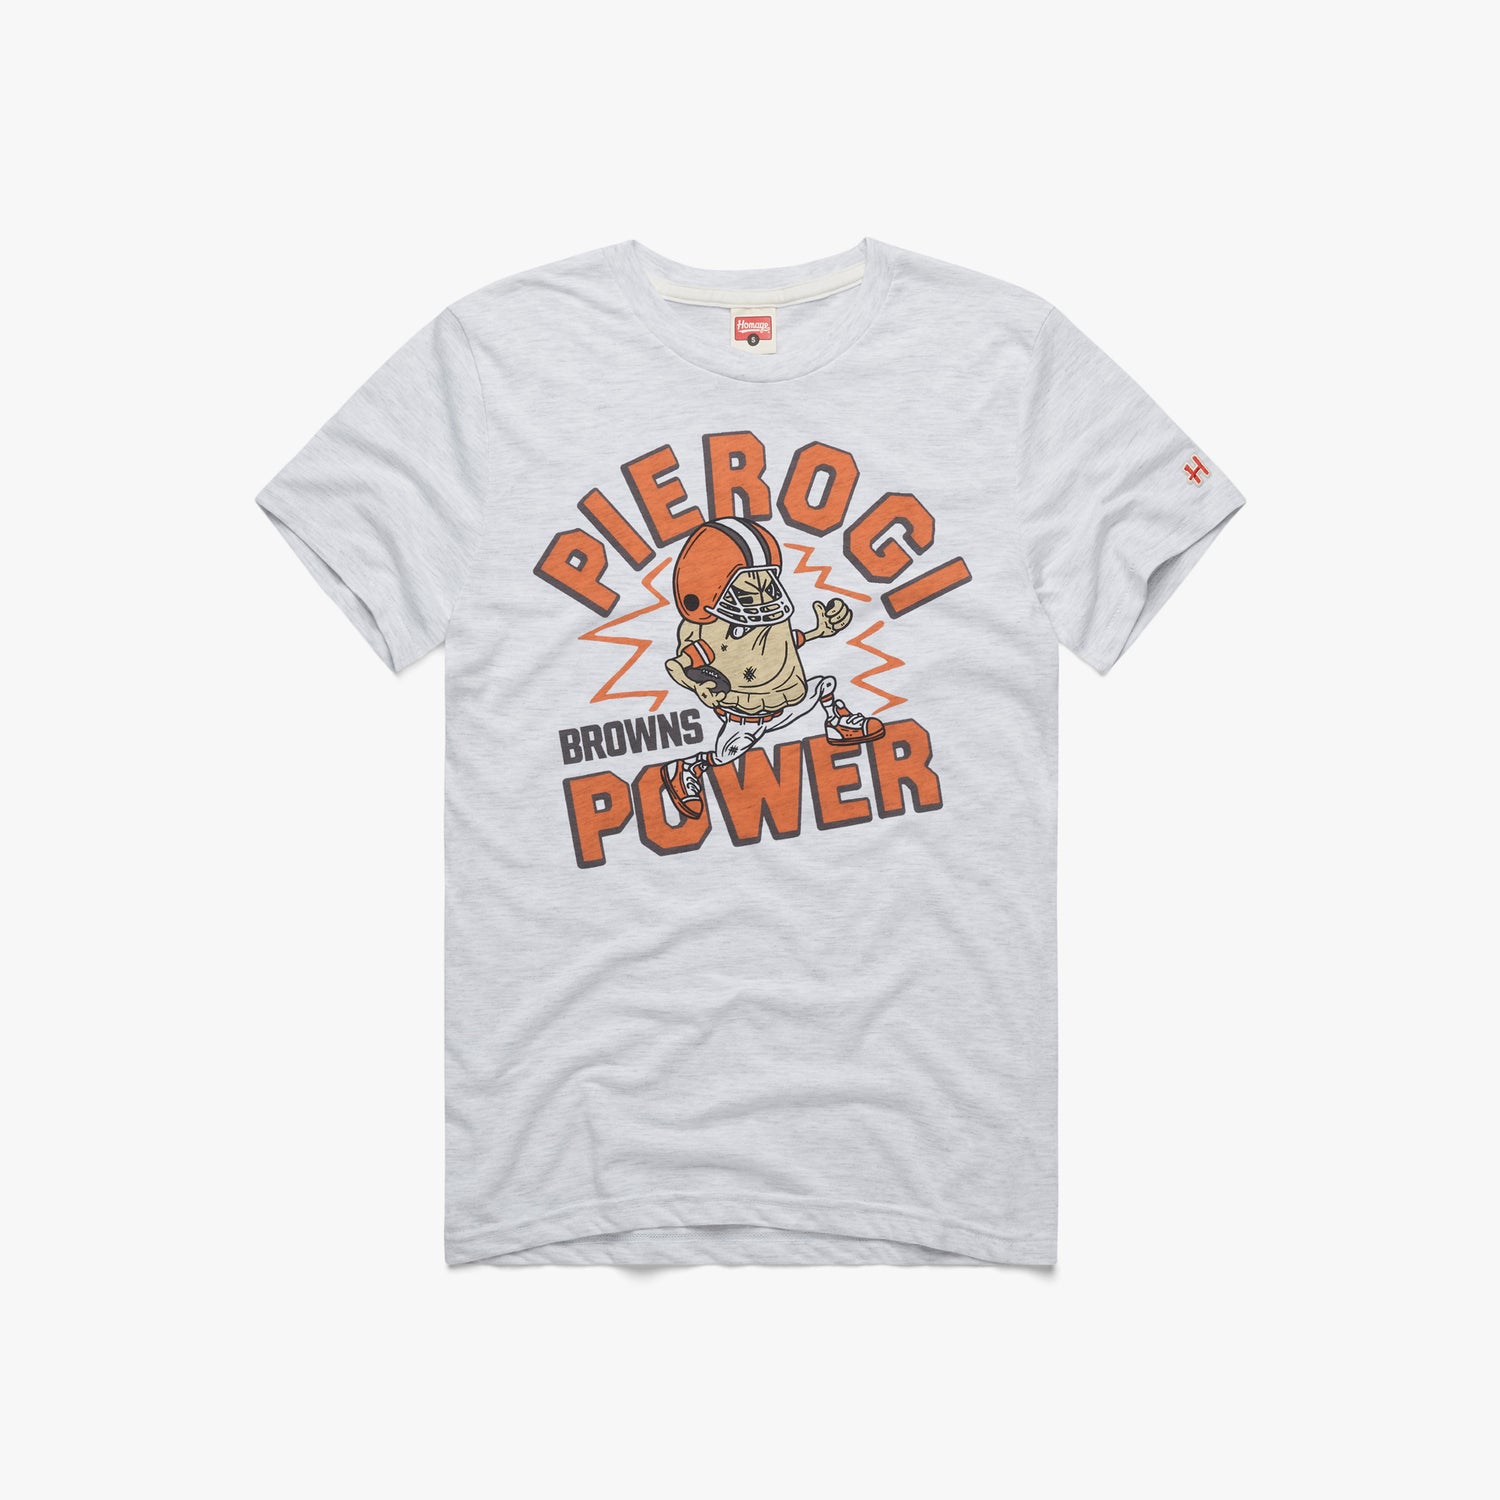 Cleveland Browns Pierogi Power T-Shirt from Homage. | Officially Licensed Vintage NFL Apparel from Homage Pro Shop.